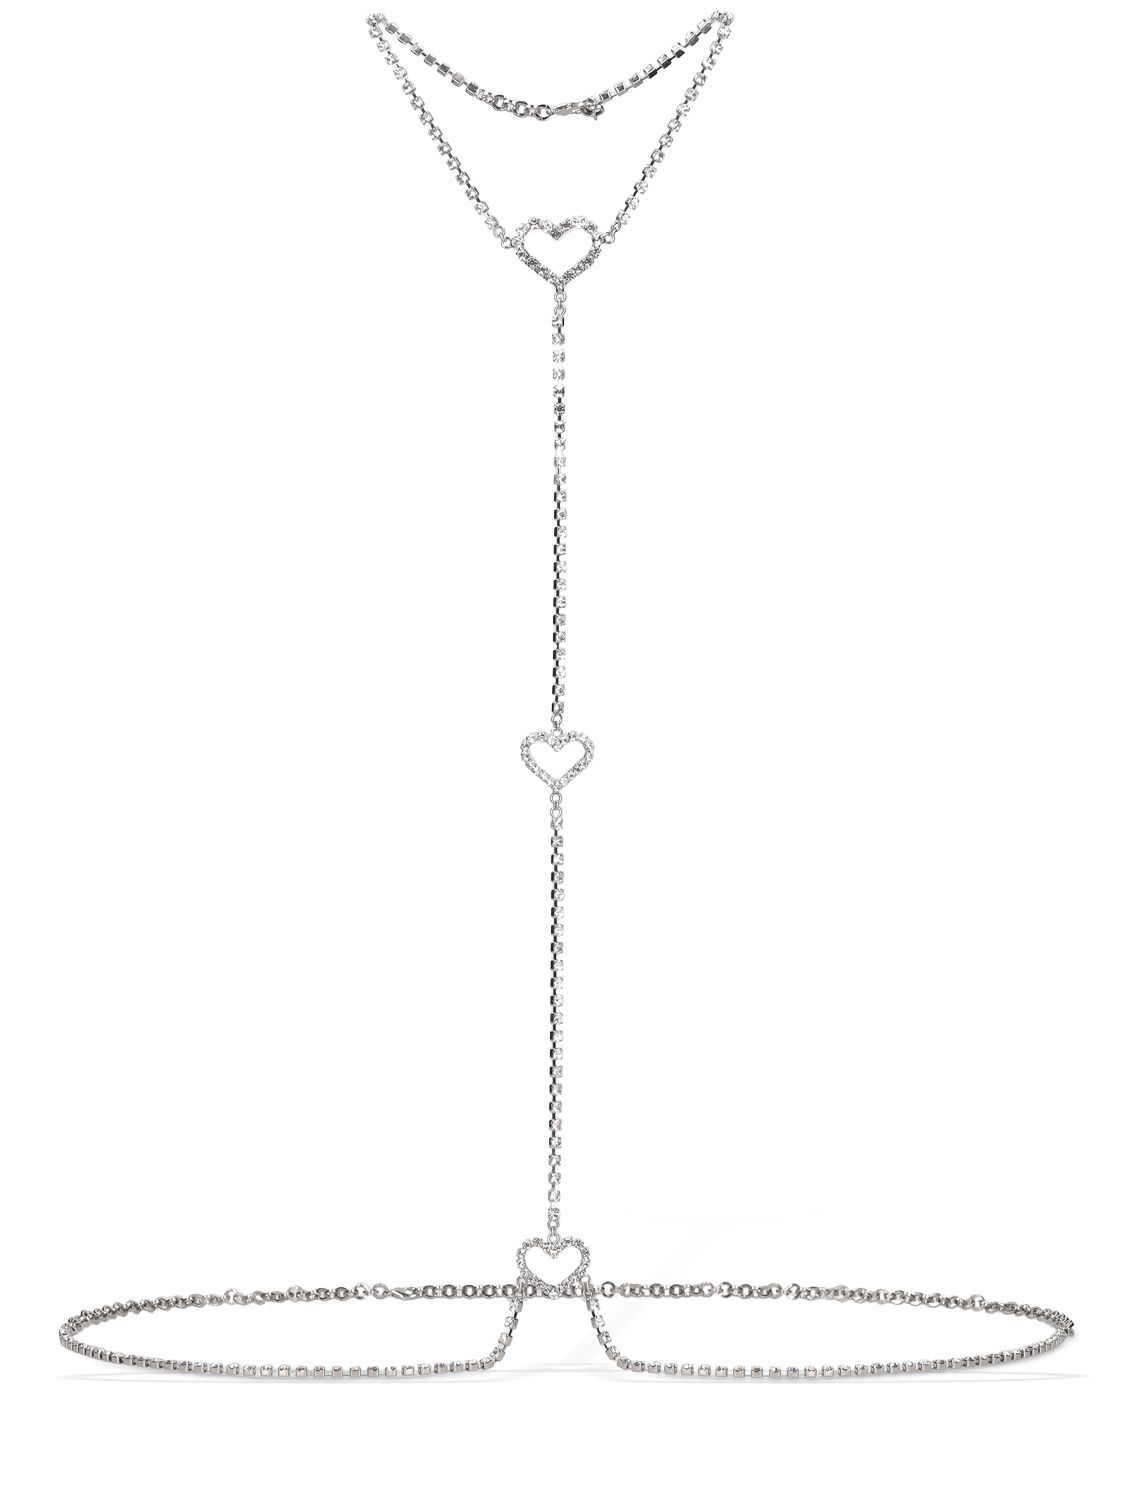 Crystal Body Chain W/ Heart Details